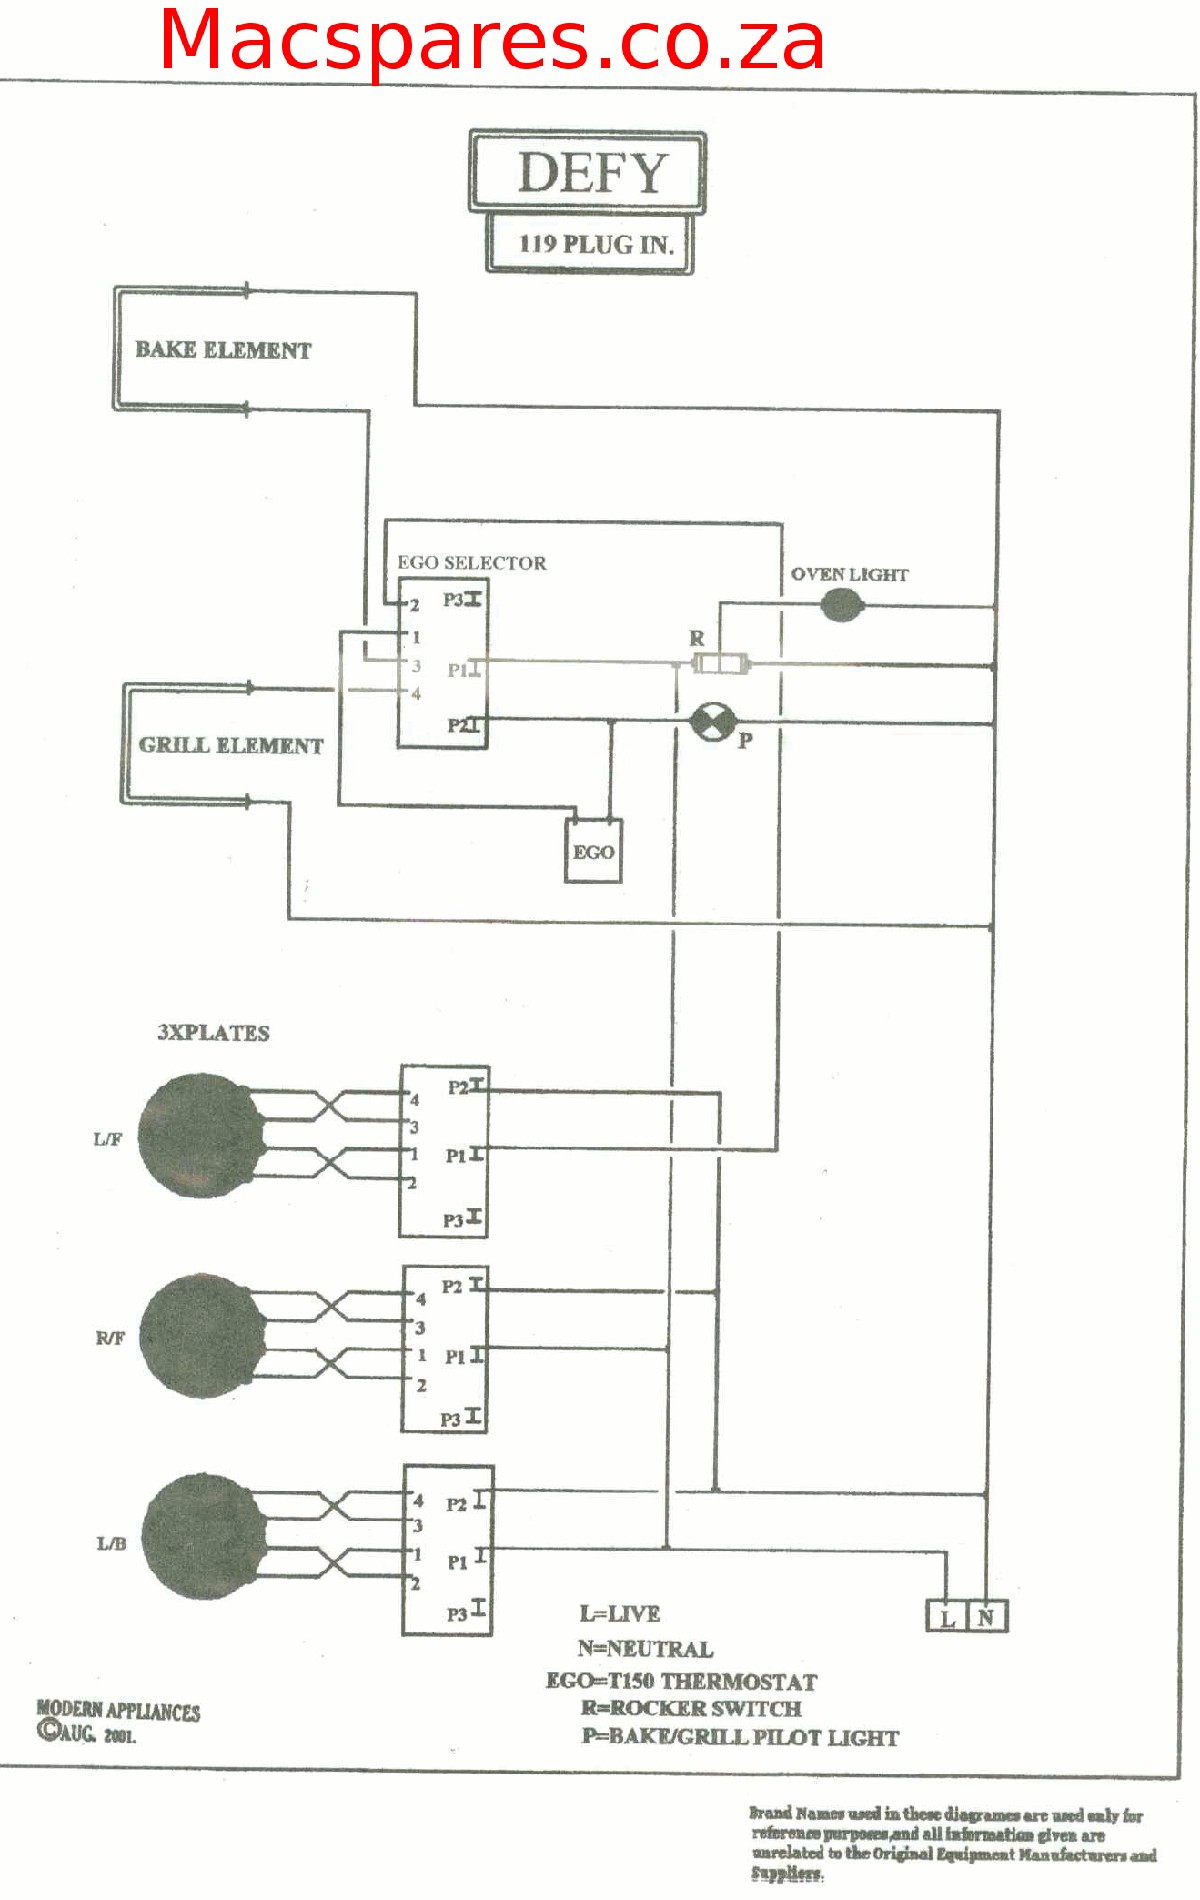 Awesome Collection Wiring Diagrams Stoves Macspares About Neff Oven Element Wiring Diagram of Neff